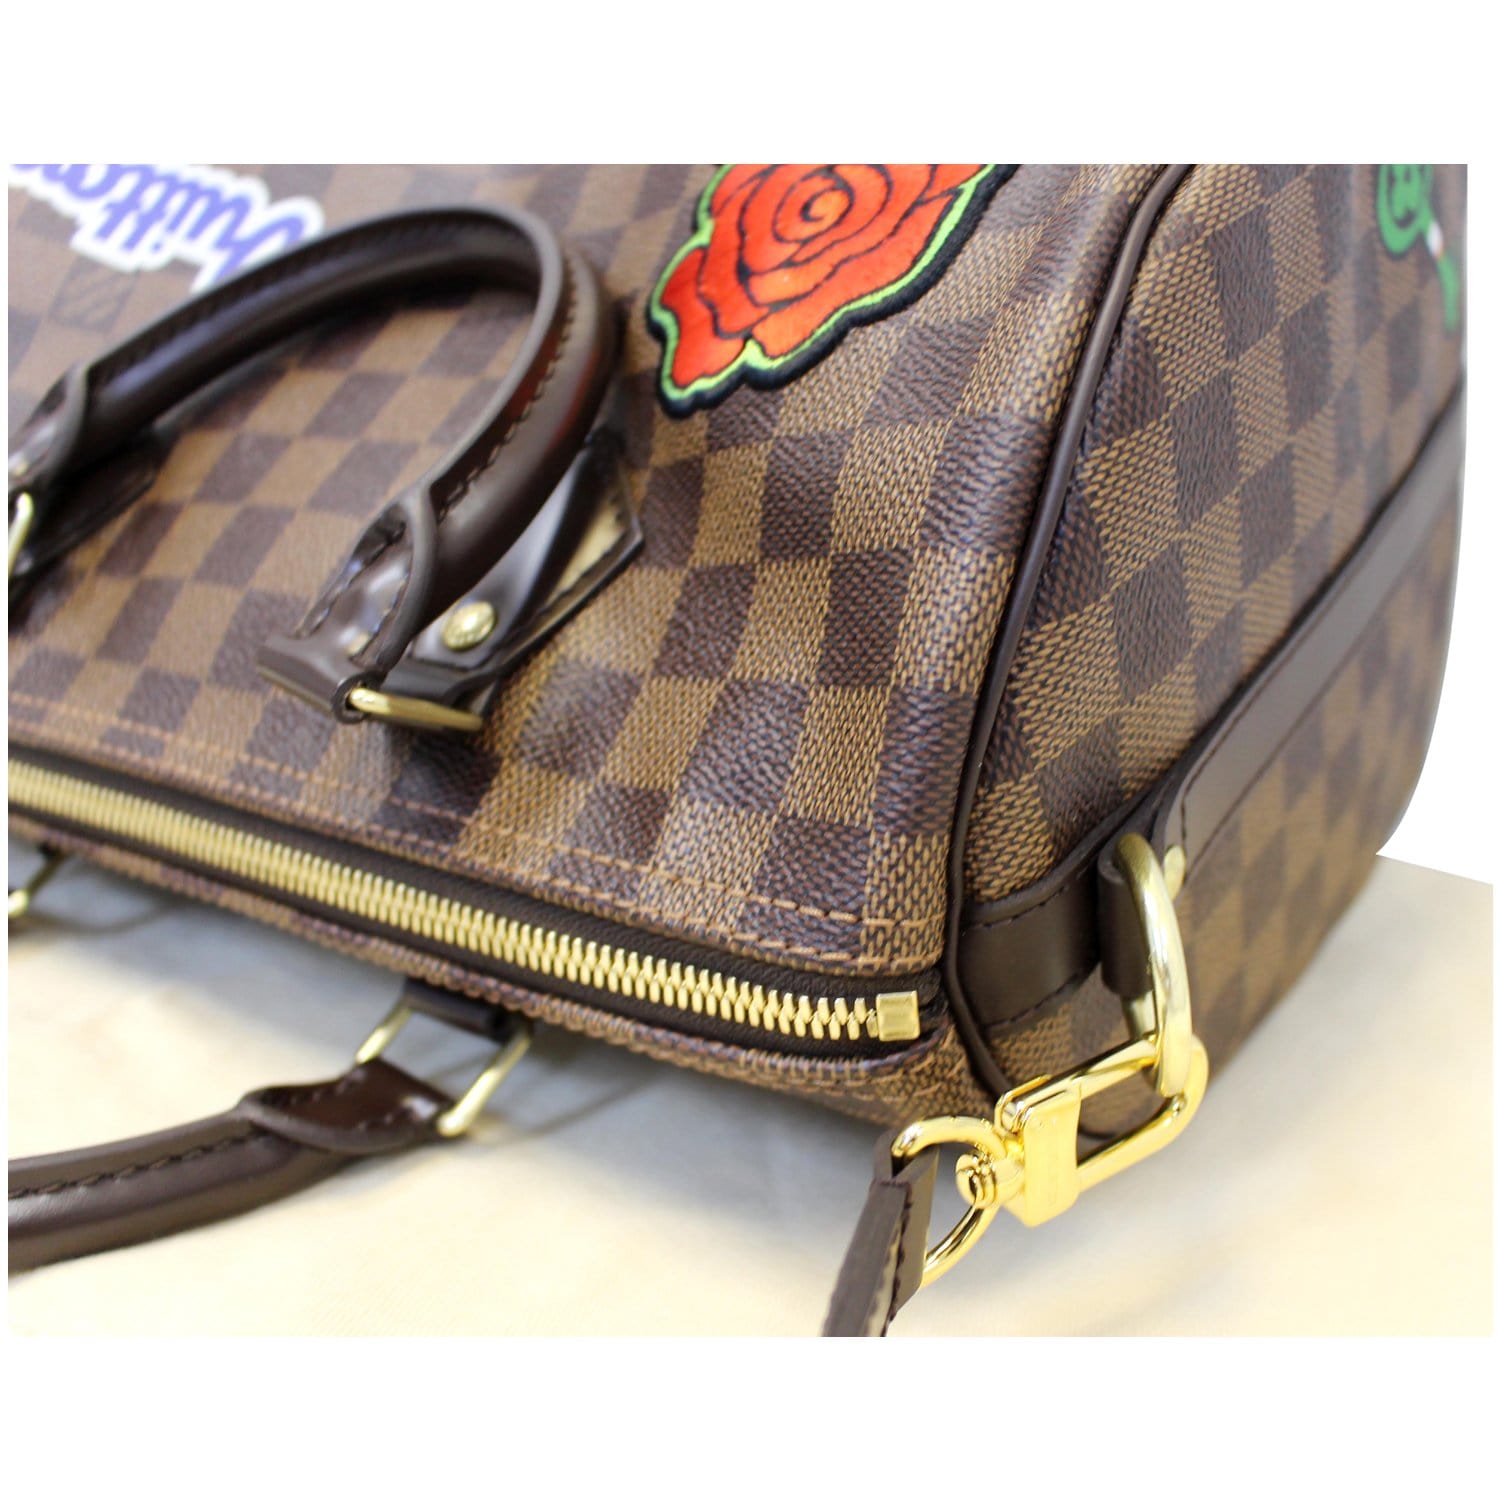 louis vuitton speedy with patches - Carrie Bradshaw Lied